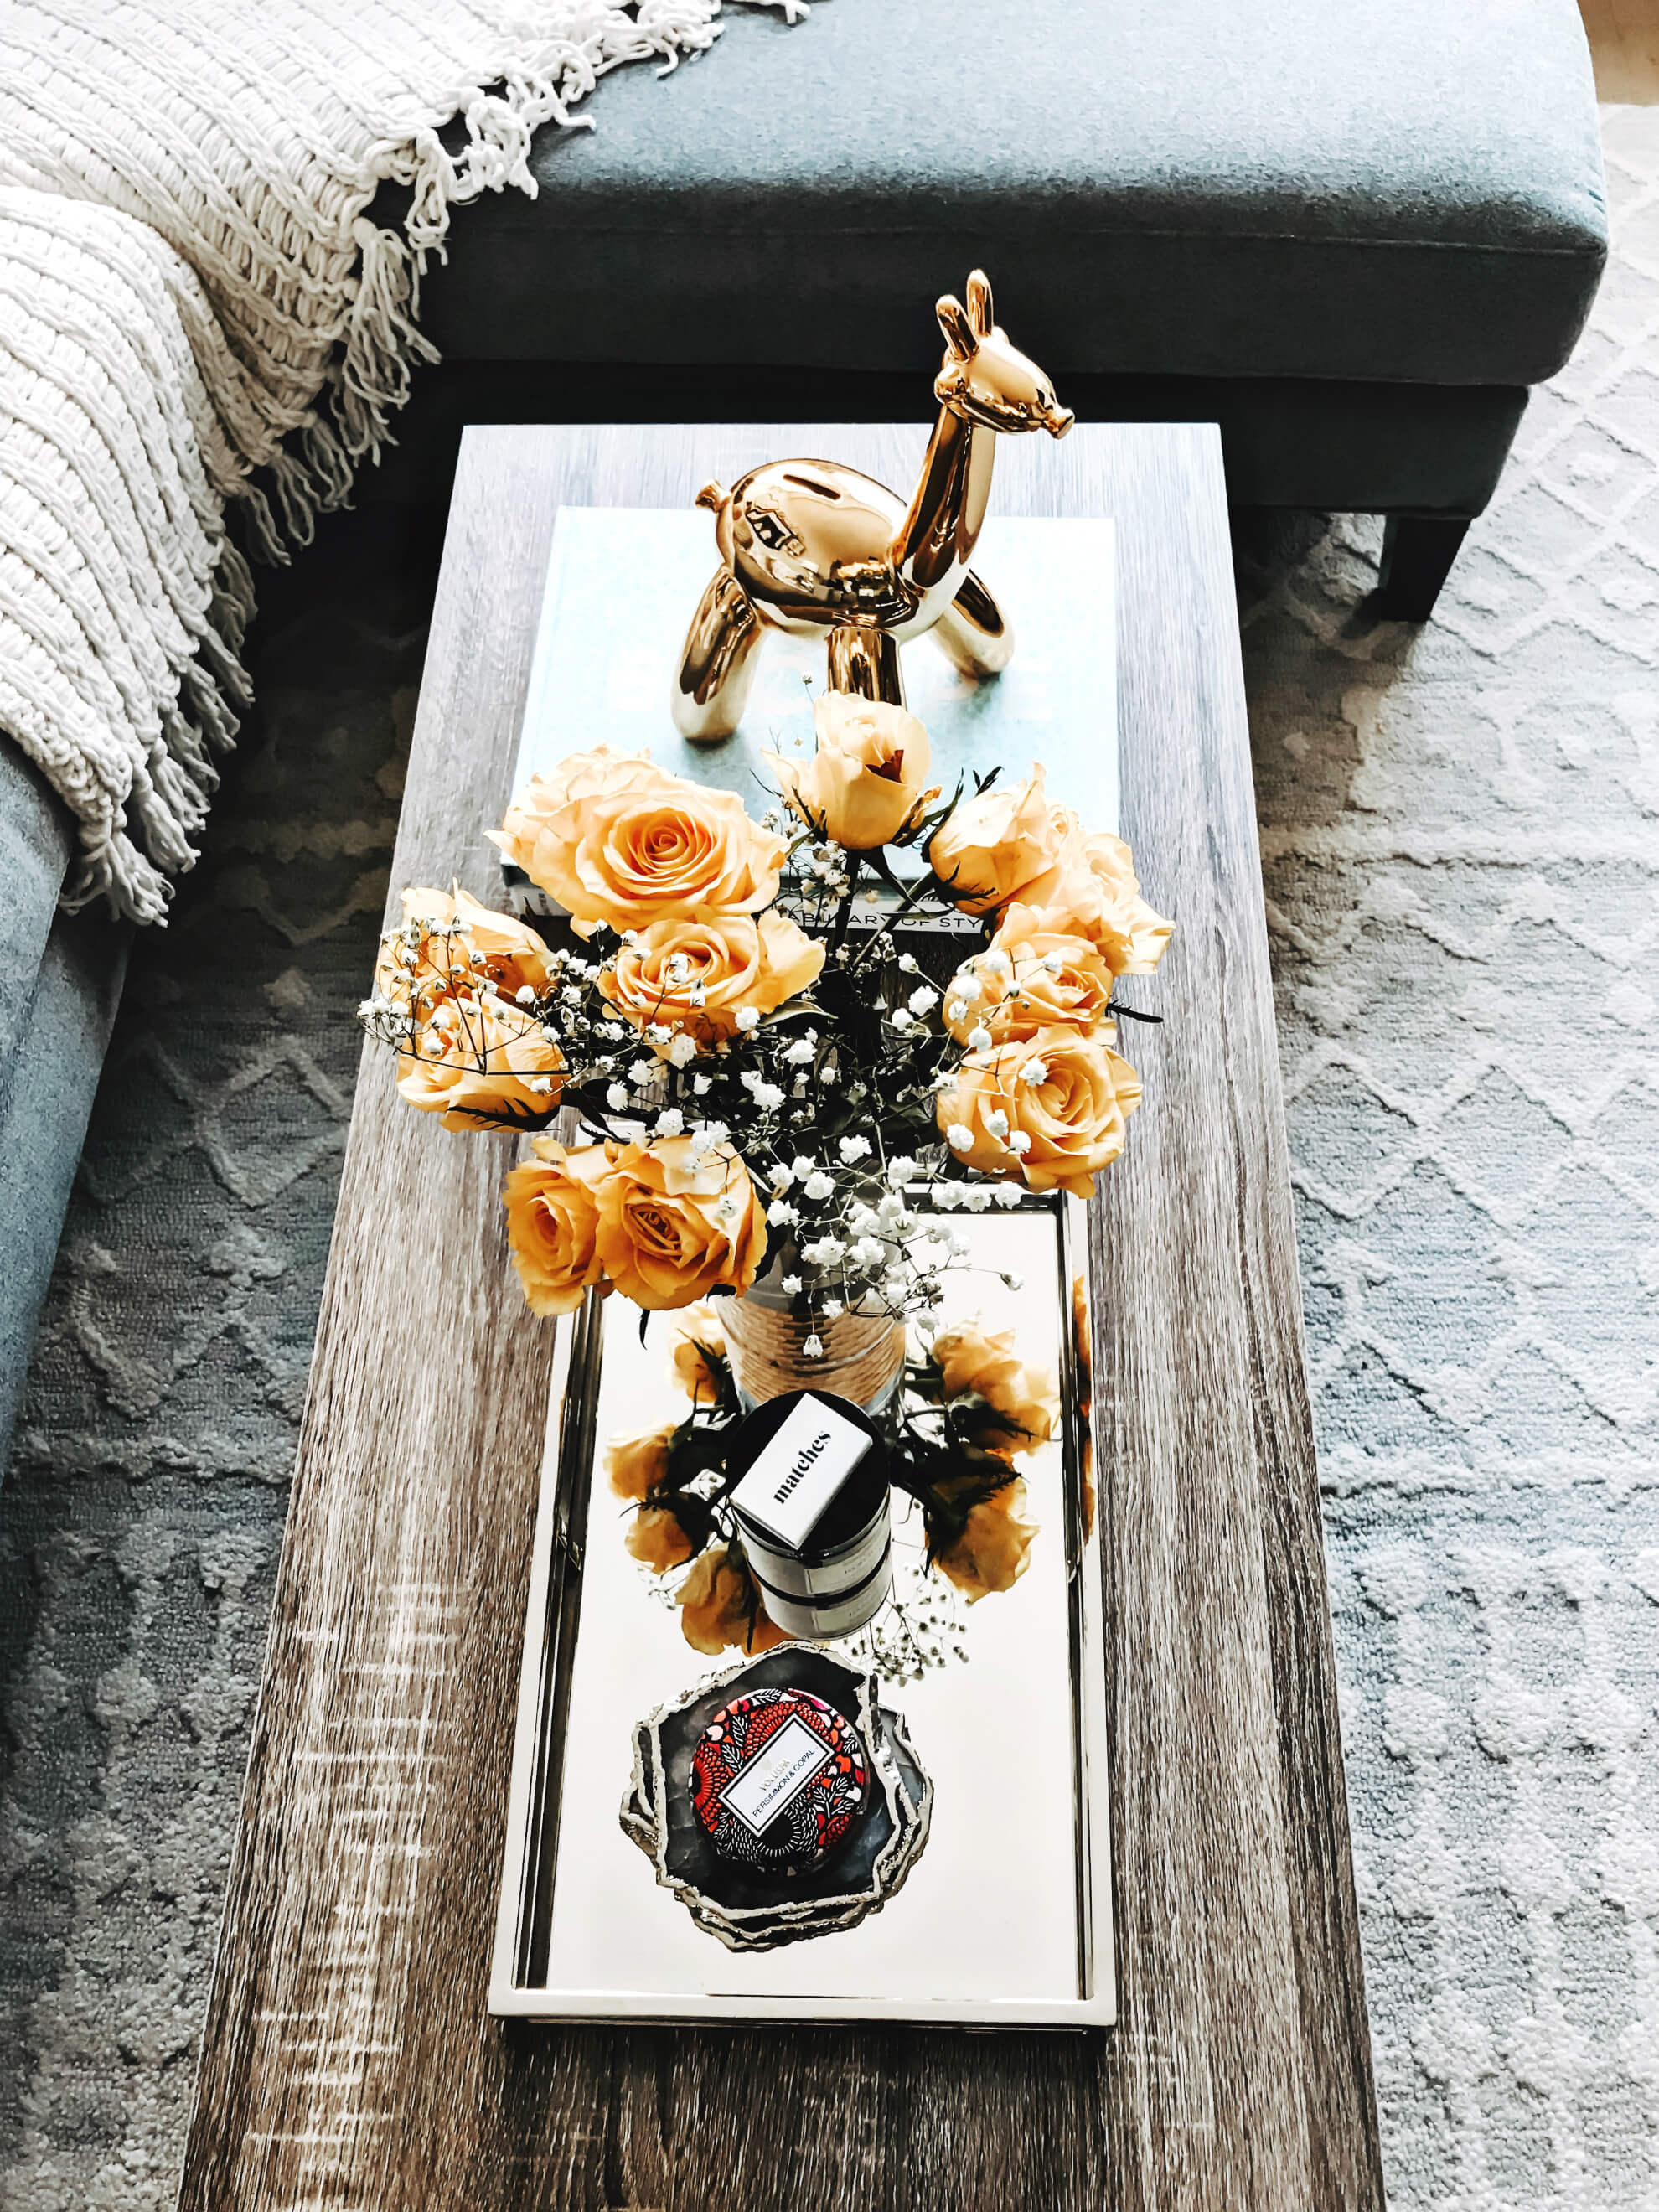 Simple Steps to Creating an Instagram-Worthy Coffee Table Display, Coffee Table Display Ideas, Apartment Living Room Coffee Table Display Ideas, Yellow Flowers, Silver Serving Tray Display, Wayfair Omar Lift Top Coffee Table, Tilden of To Be Bright